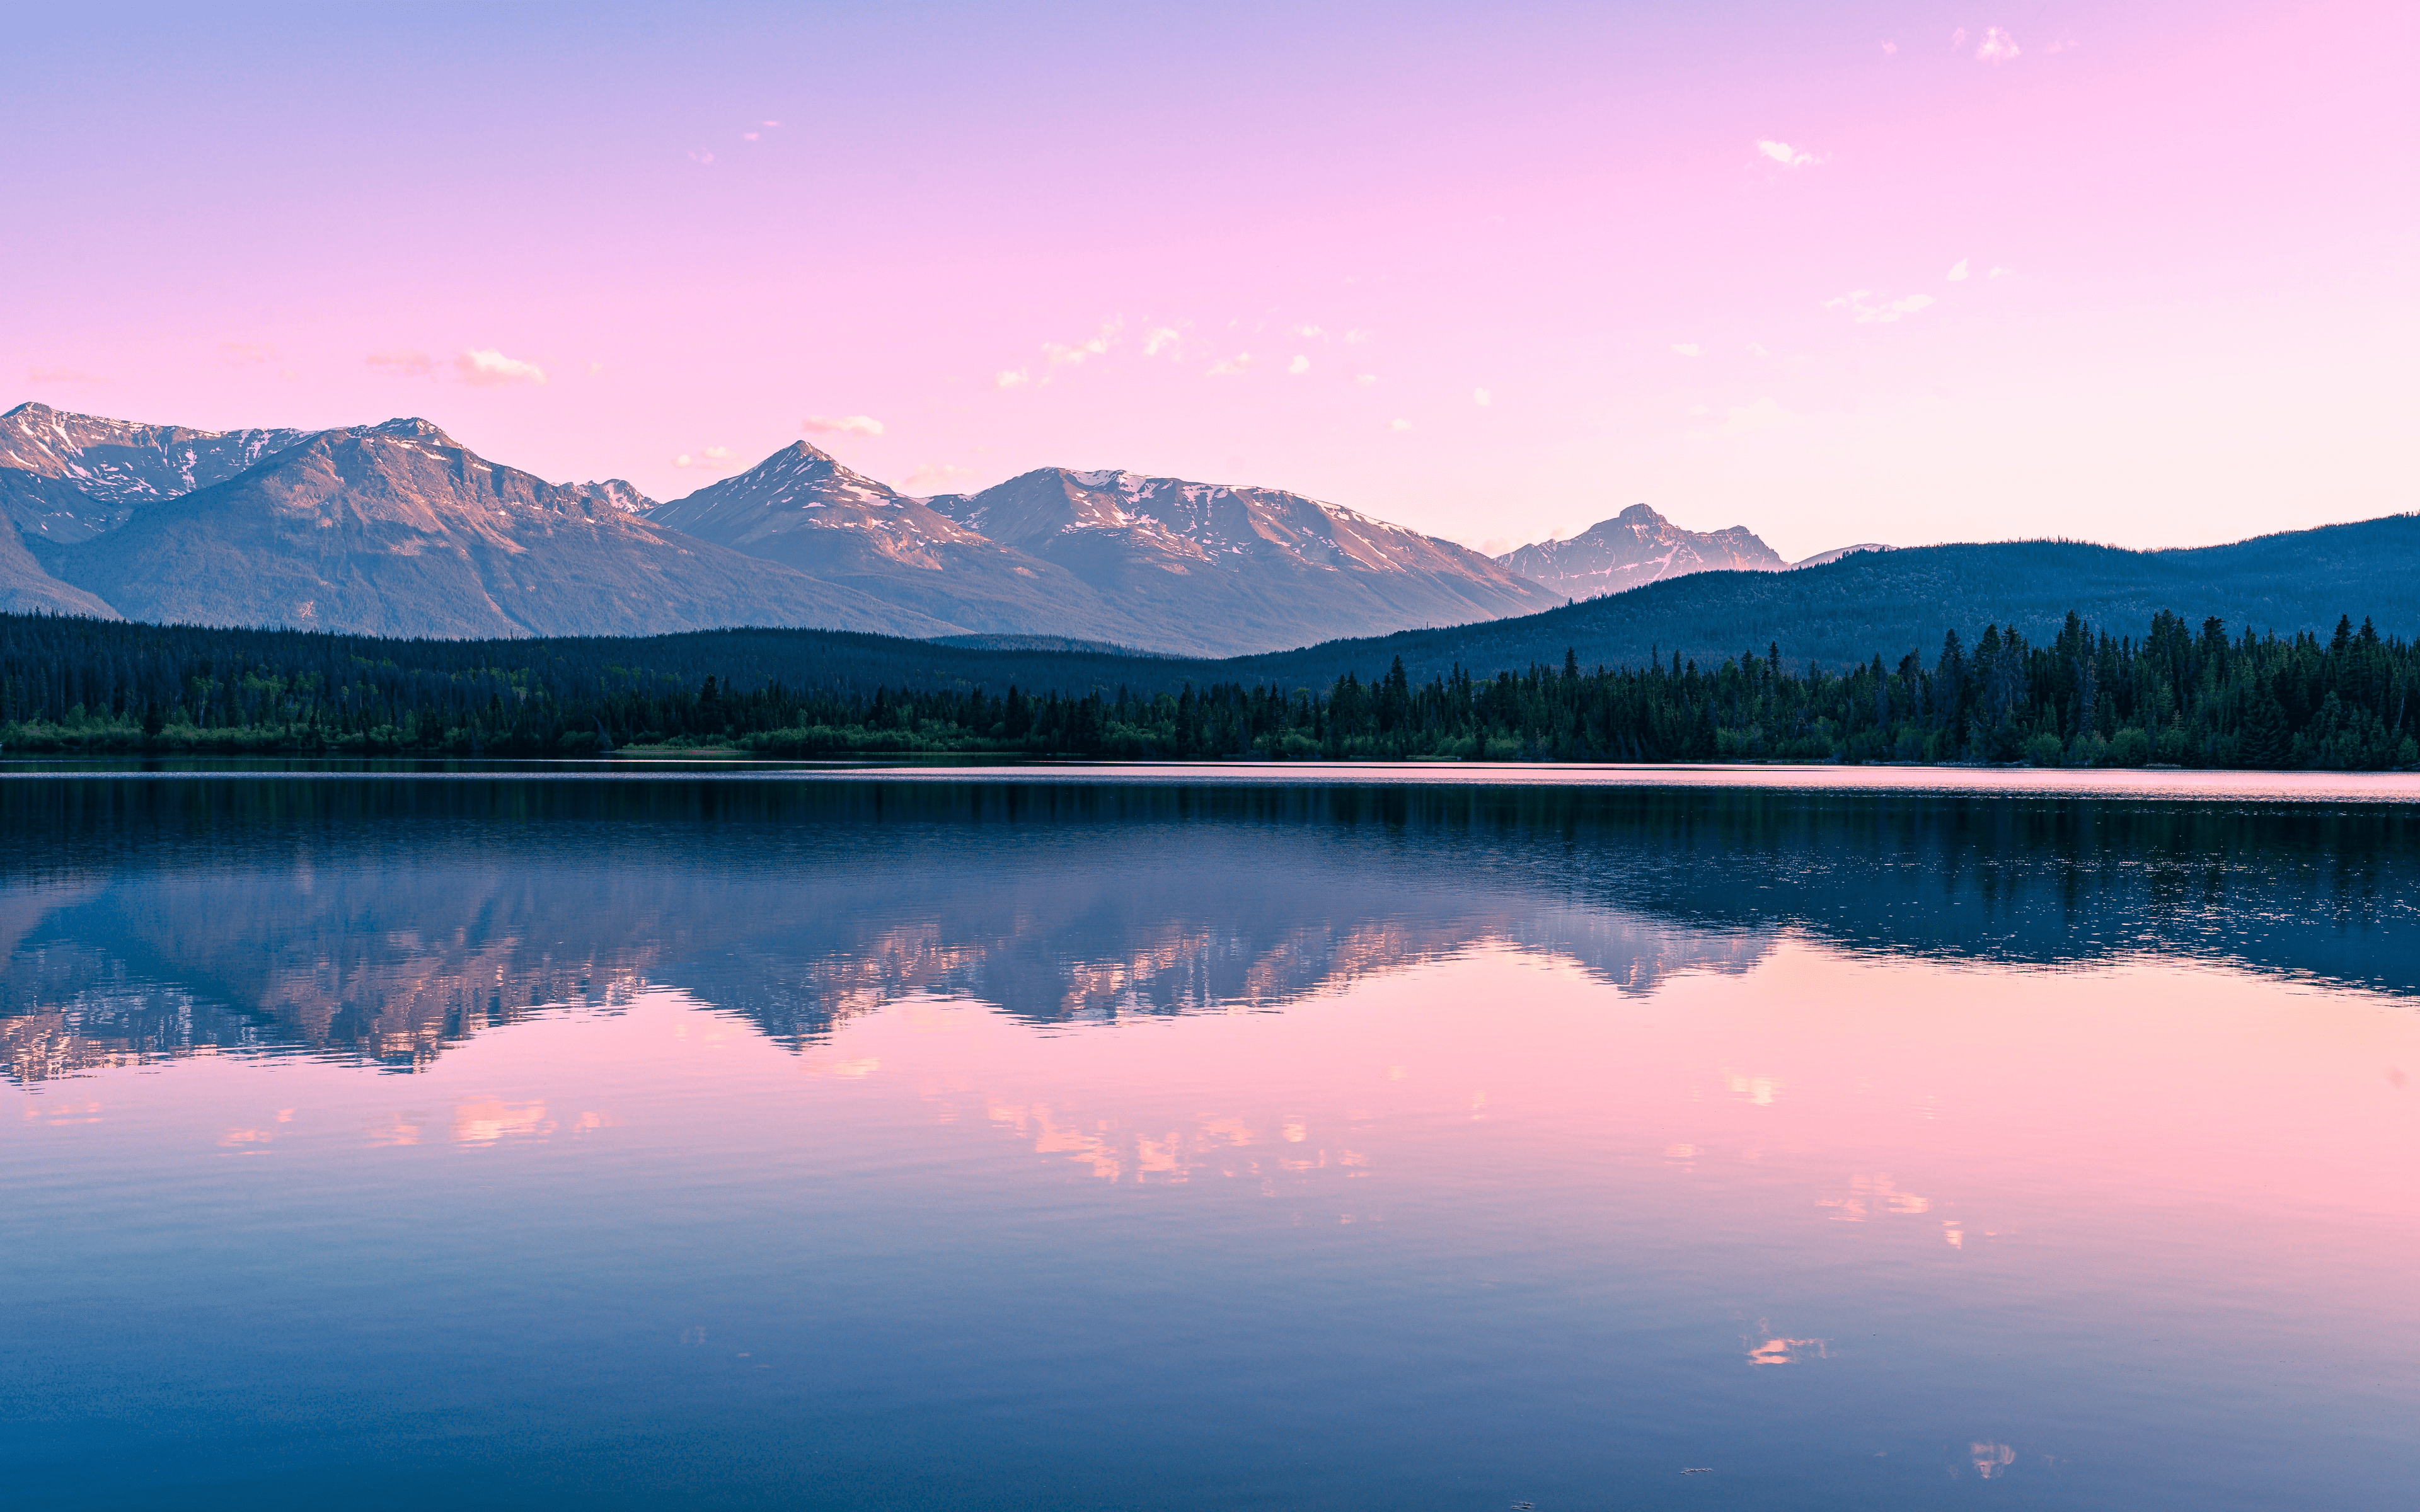 General 3840x2400 nature landscape mountains trees clouds sky water reflection morning Pyramid Lake Jasper National Park Canada Dennis Mita